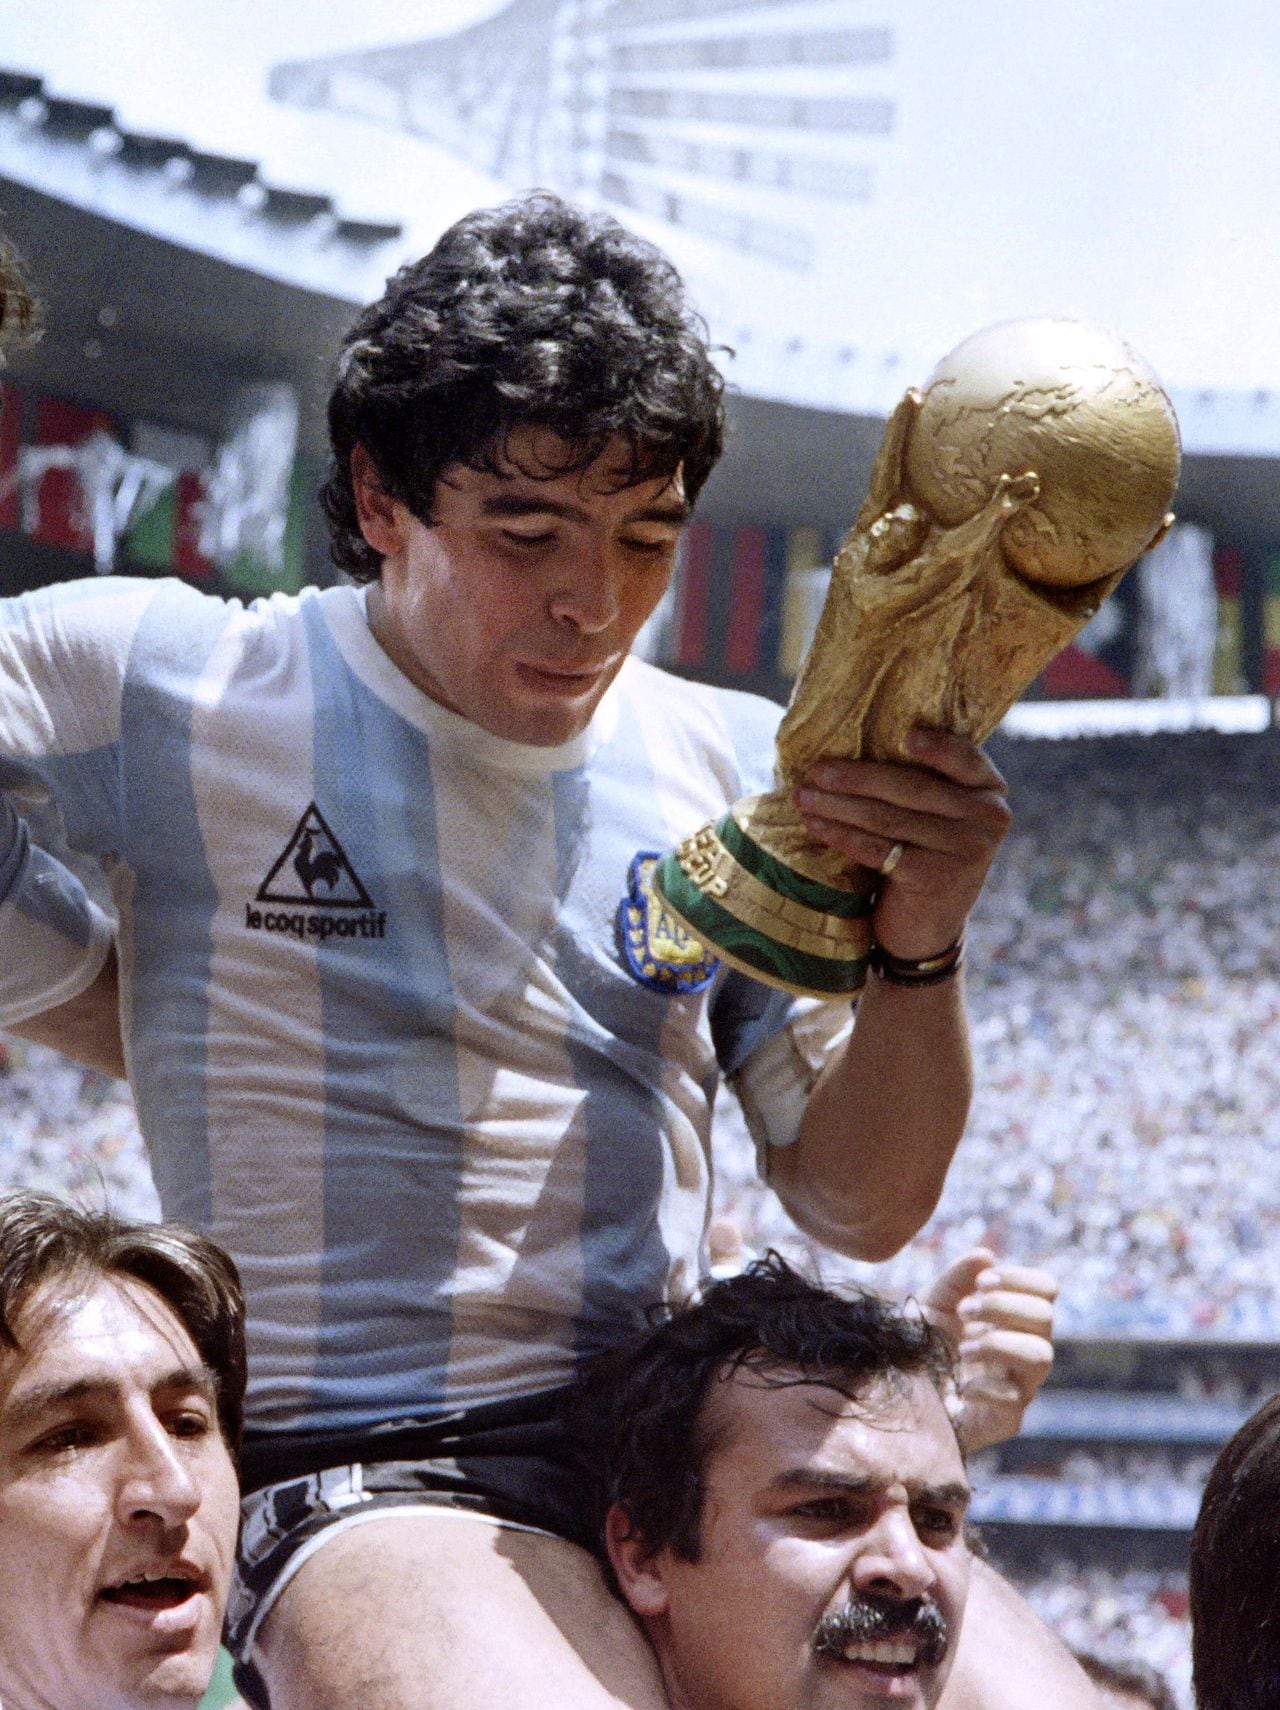 Argentina's forward Diego Maradona is carried on the shoulders of fans as he does a victory lap holding the FIFA World Cup after Argentina defeated West Germany 3-2 in the World Cup final on June 29, 1986 in Mexico City. (Photo by STAFF / AFP)